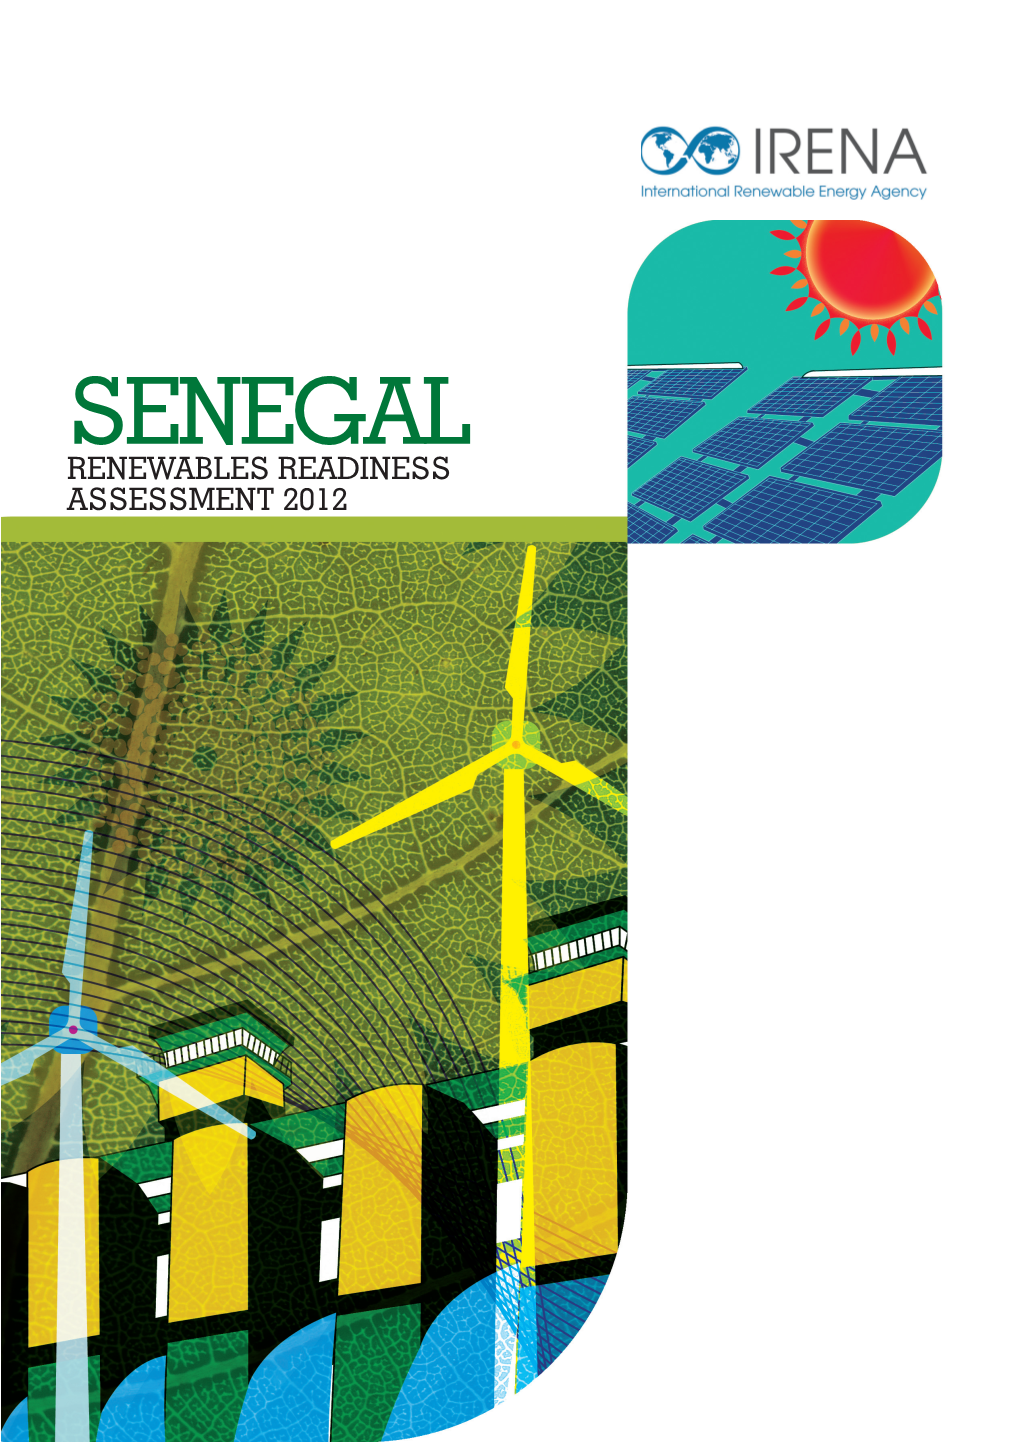 SENEGAL RENEWABLES READINESS ASSESSMENT 2012 About IRENA